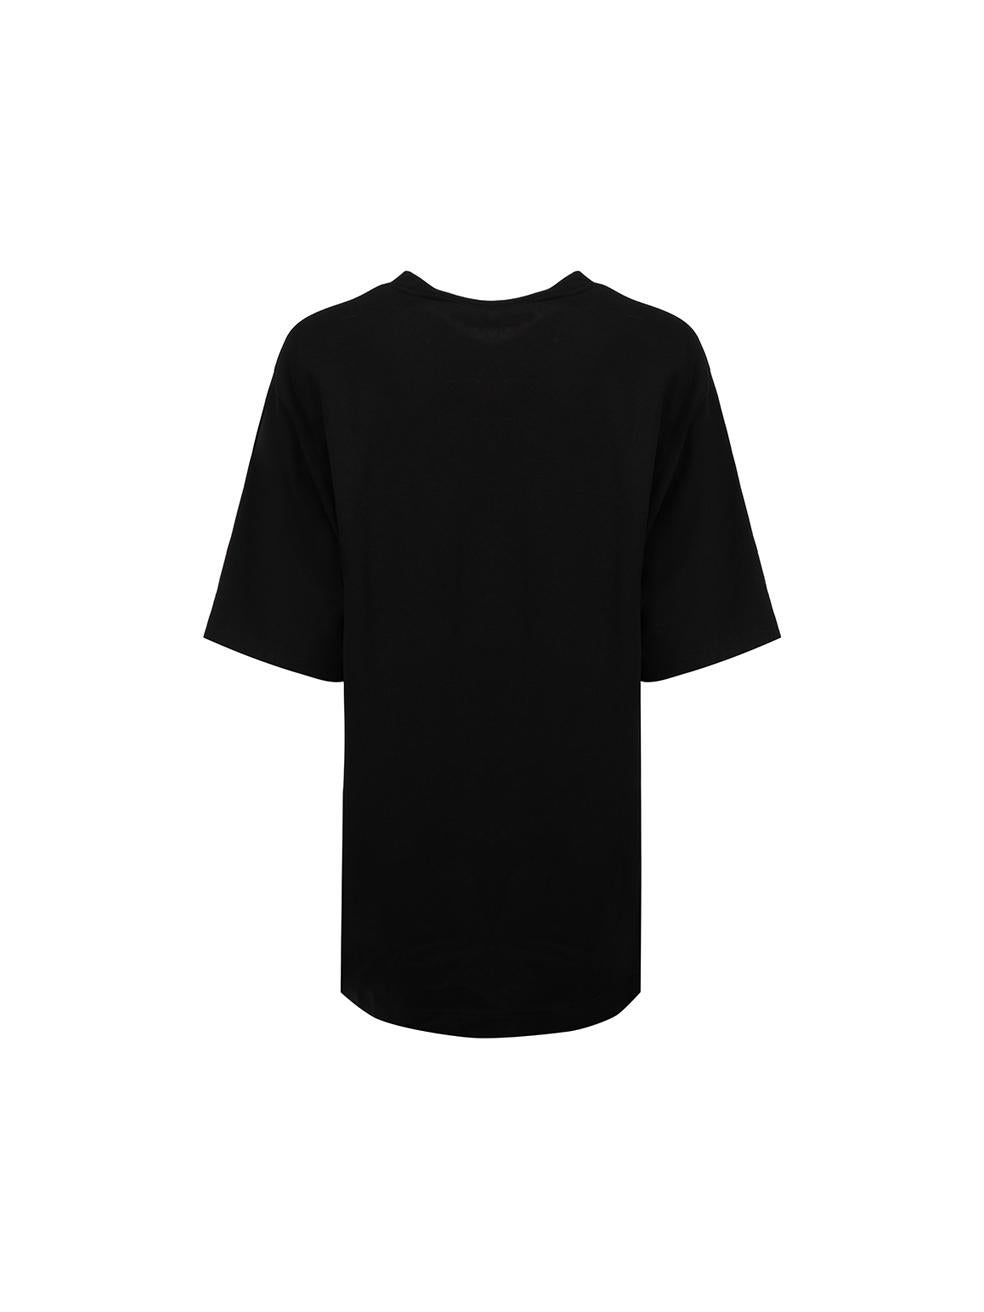 Black Cotton Silver Realtà Parallela Print T-Shirt Size S In New Condition For Sale In London, GB